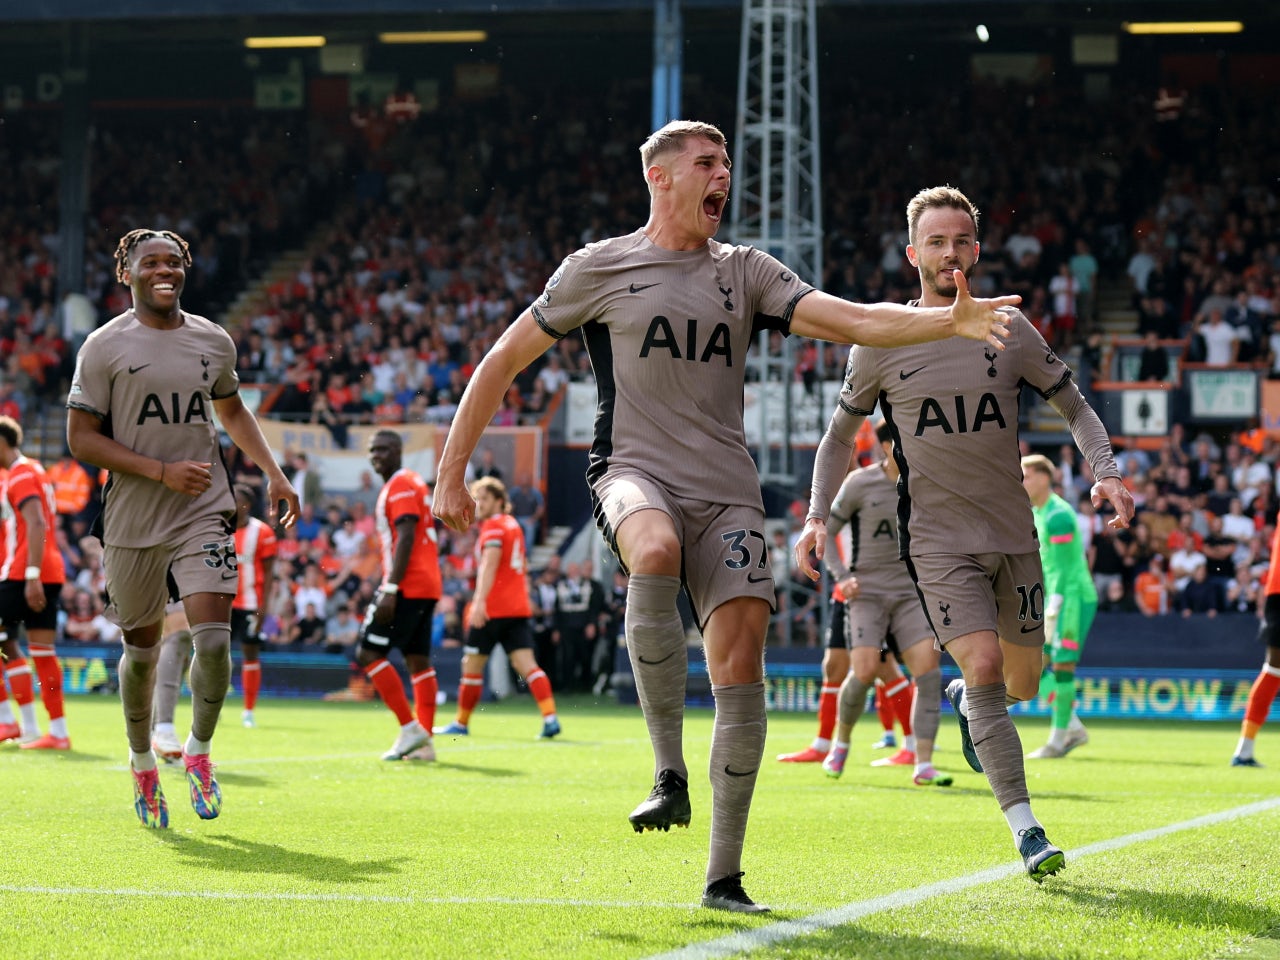 EPL Premier League results: Ange Postecoglou's Tottenham Hotspur go top of  table, Manchester United comeback win over Sheffield, highlights, reaction,  scores